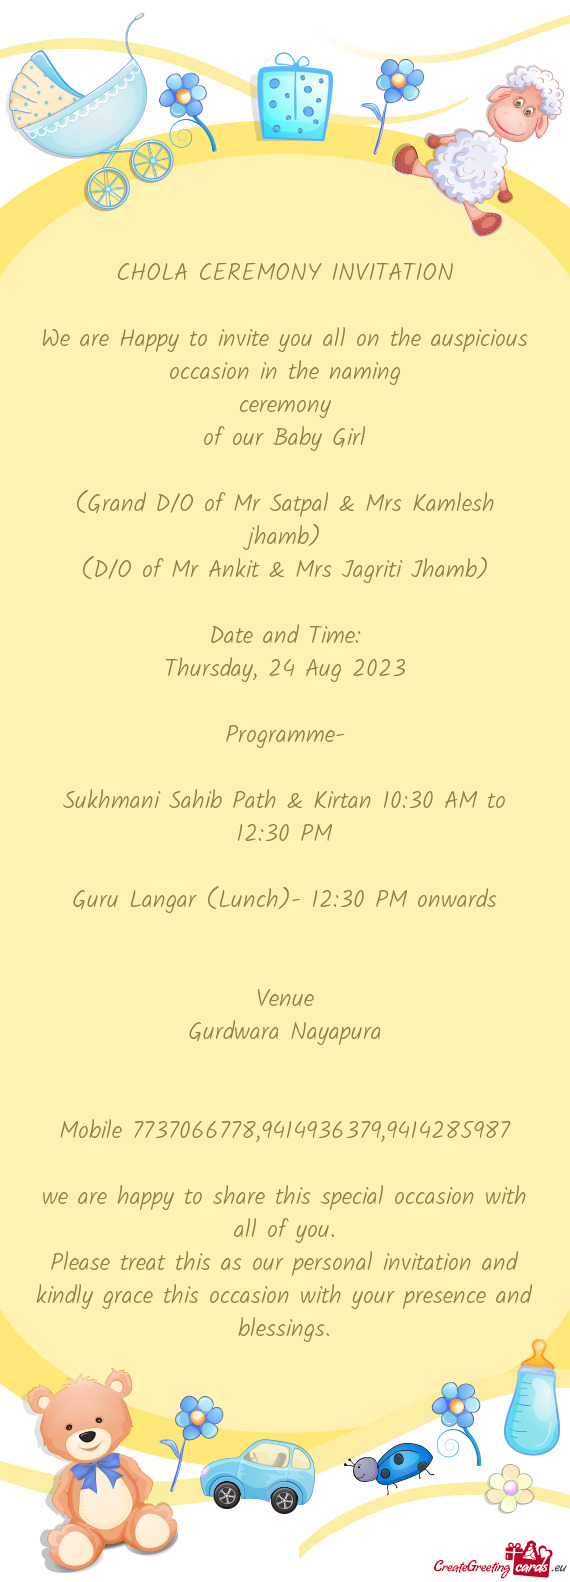 We are Happy to invite you all on the auspicious occasion in the naming